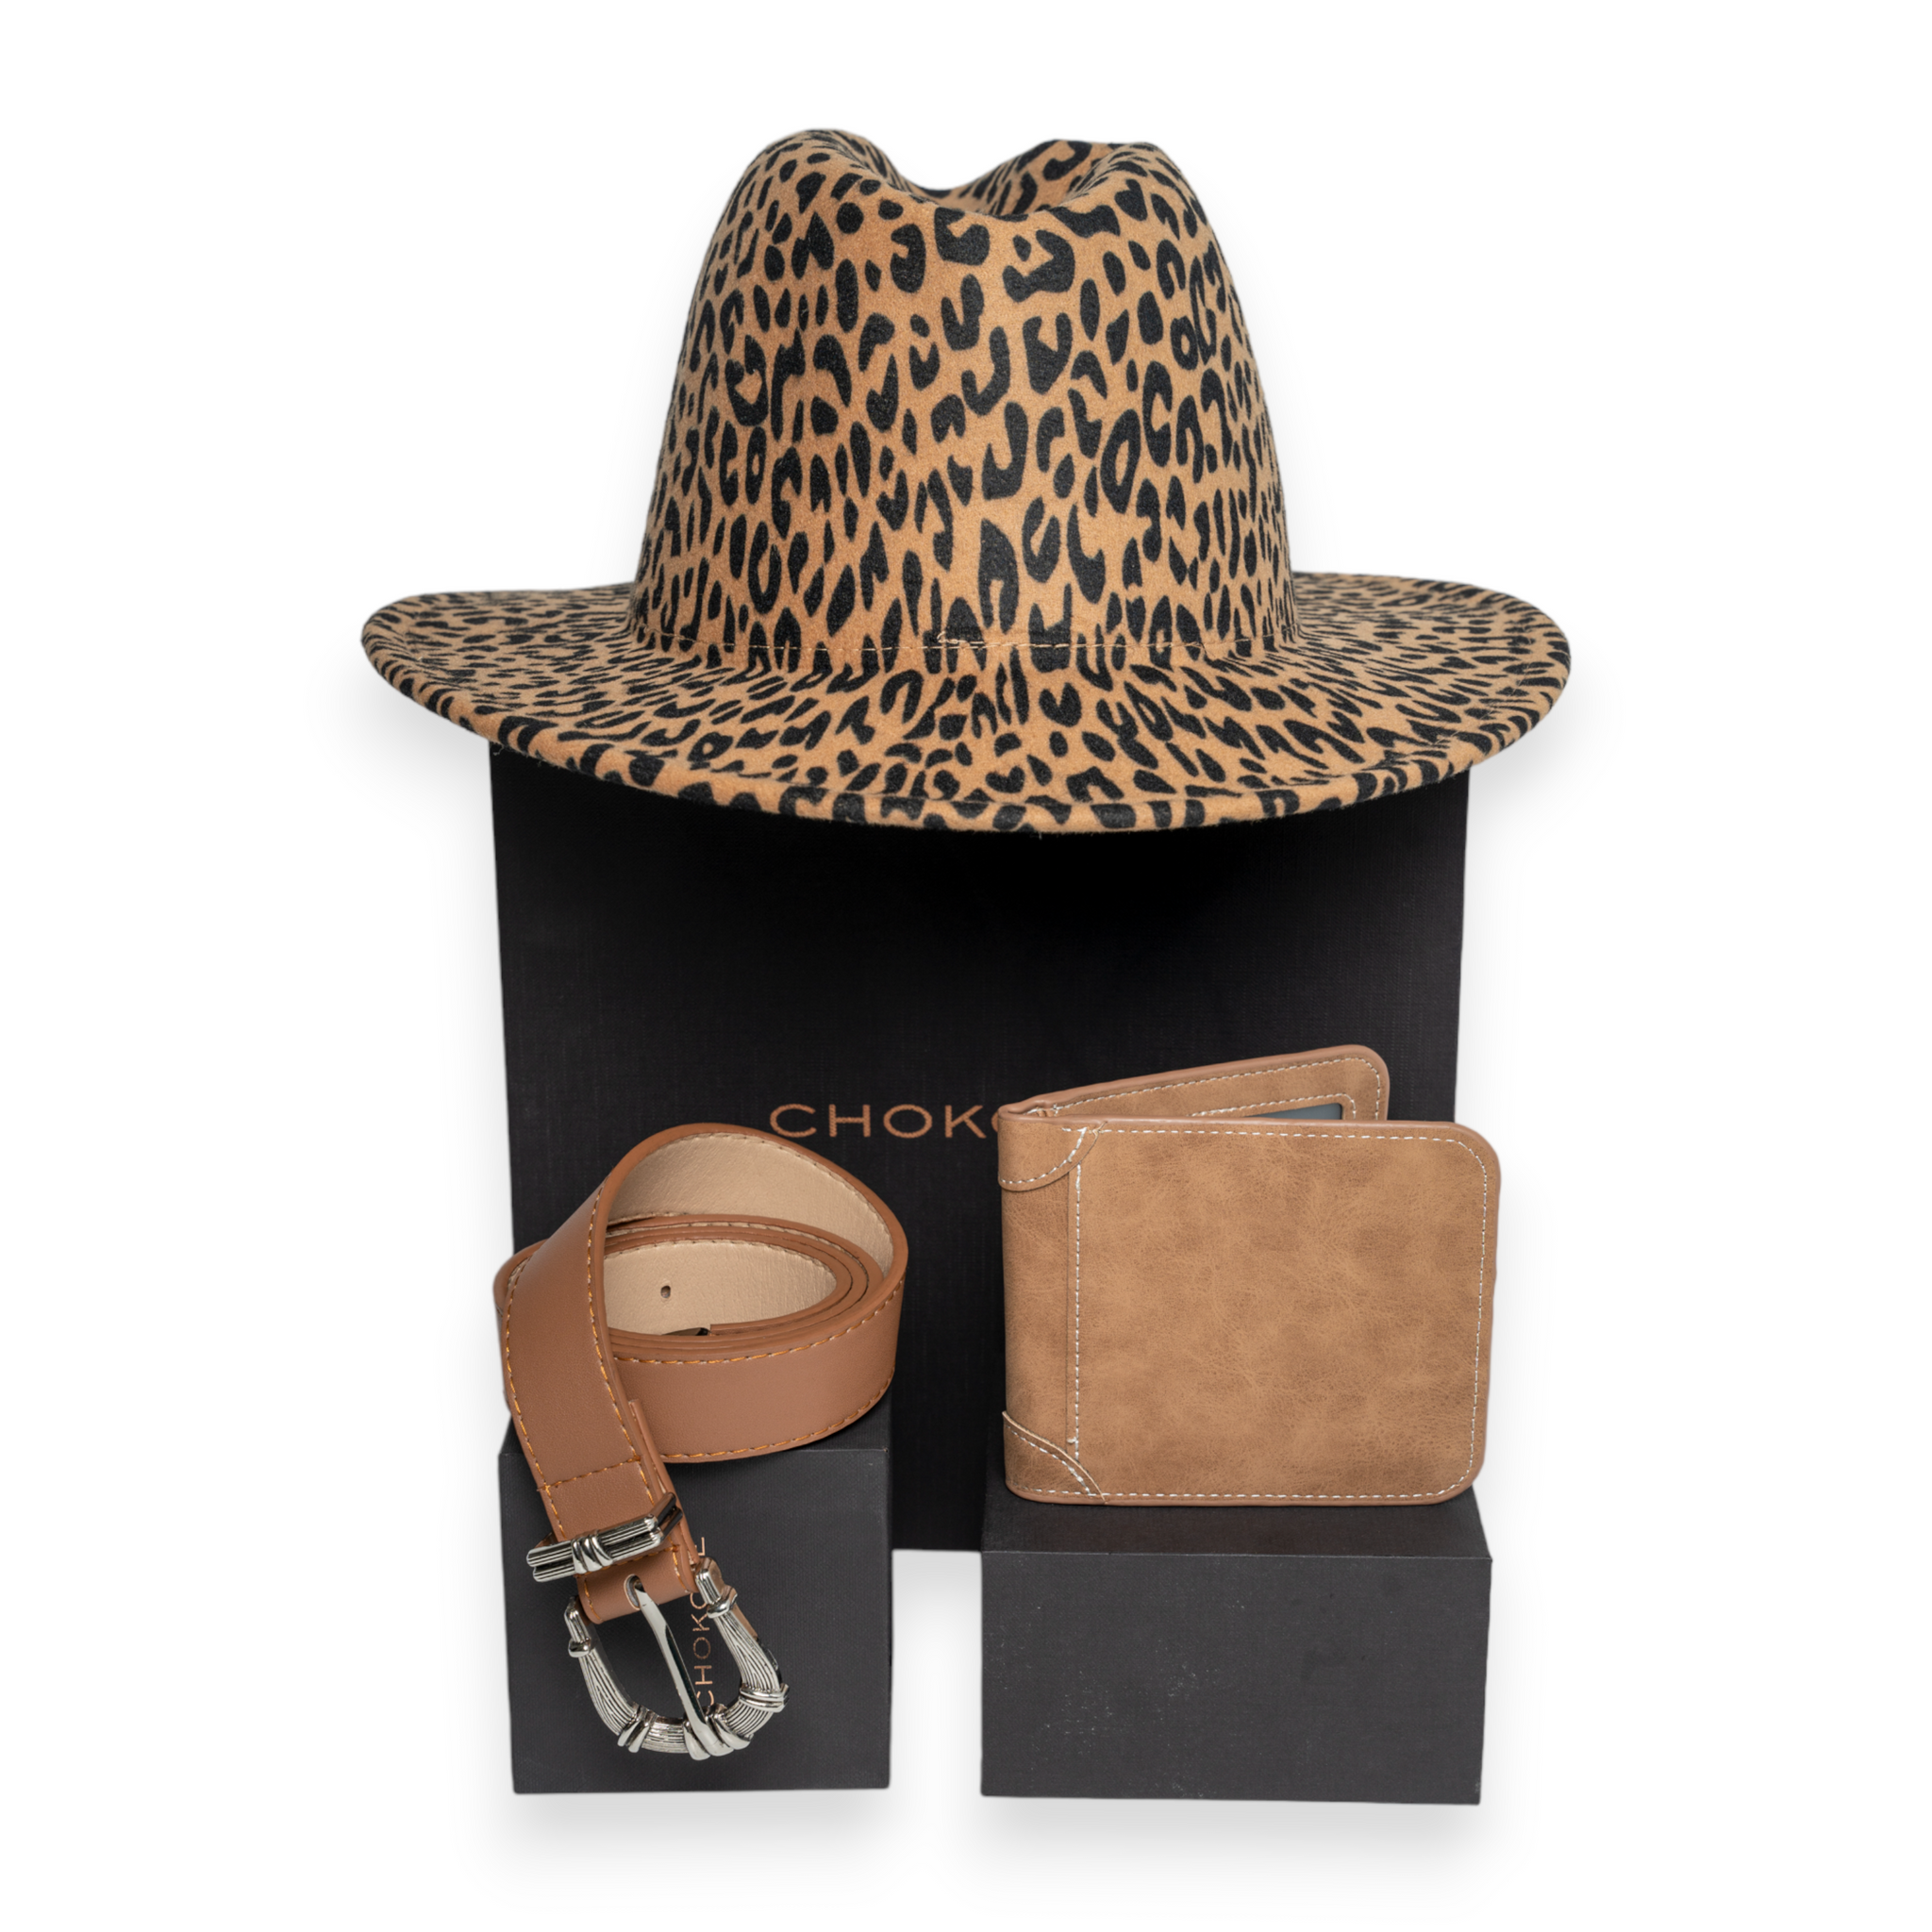 Chokore Special 3-in-1 Gift Set for Him & Her (Buckle Belt, Wallet, & Leopard print Hat)